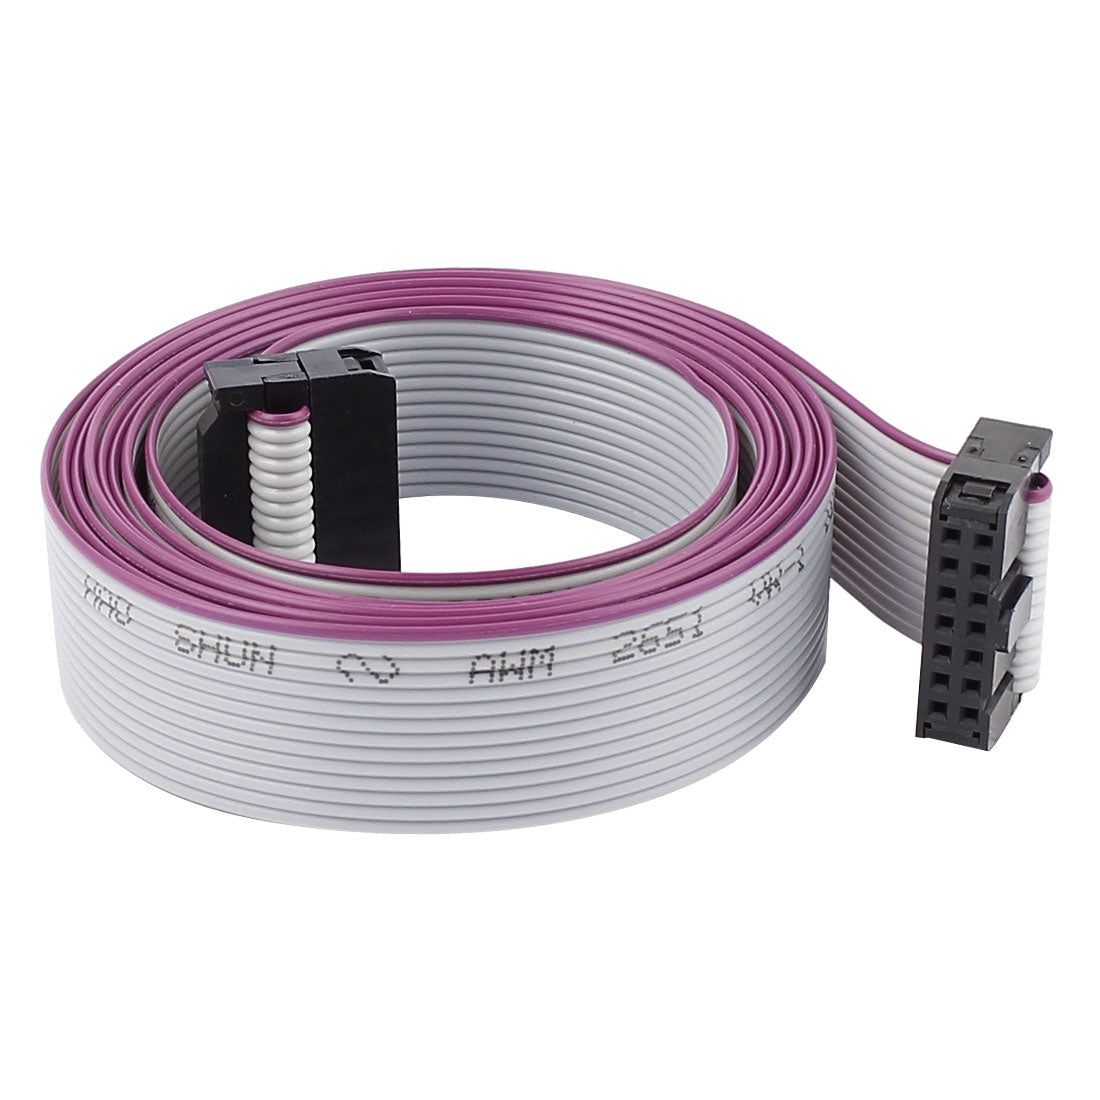 uxcell Uxcell 2.54mm Pitch 14Pin 14 Wire F/F IDC Connector Flat Ribbon Cable 148cm Length